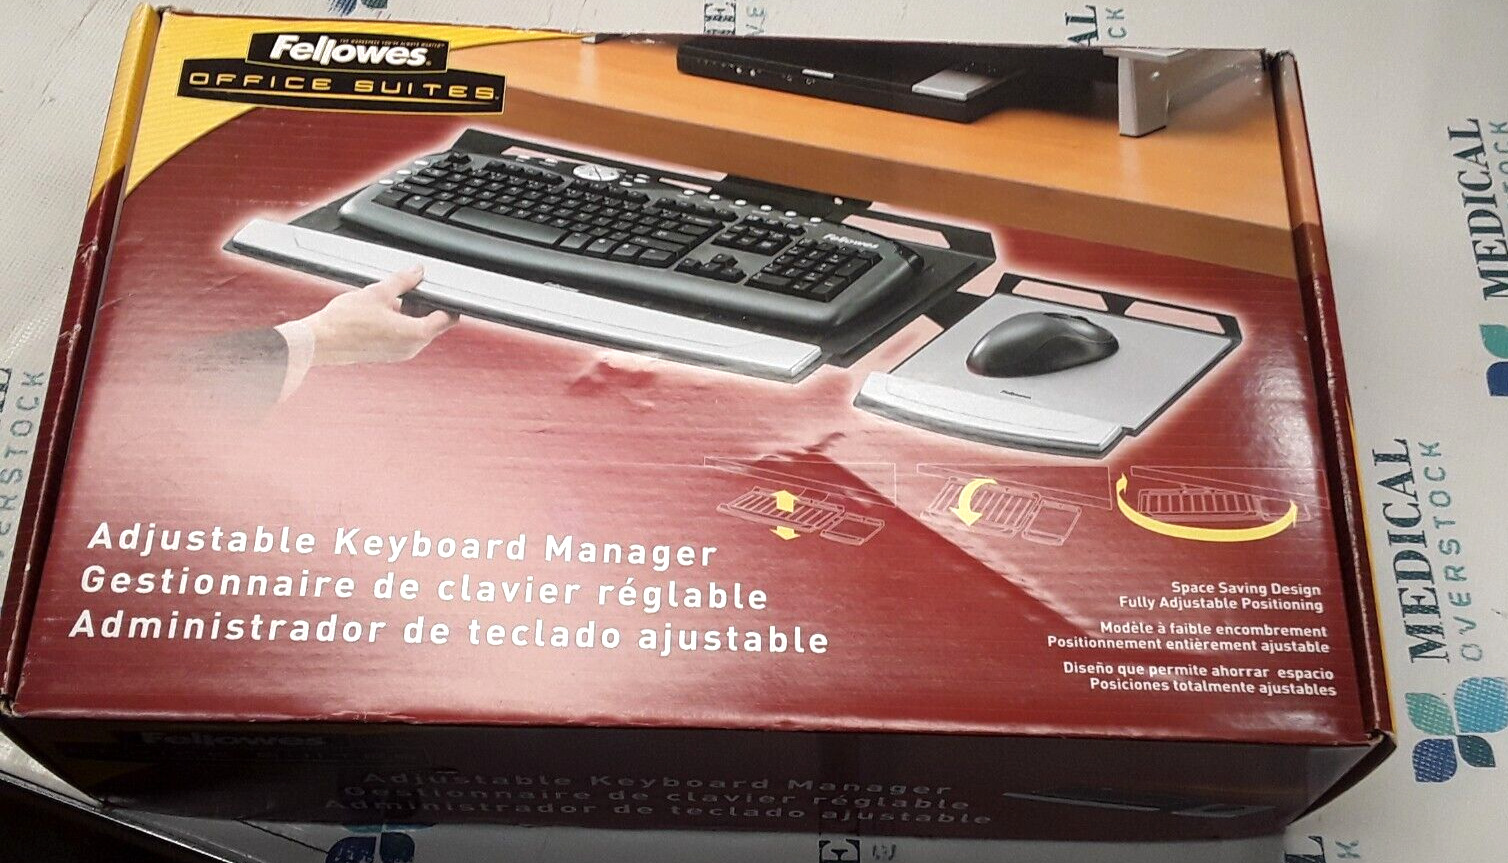 CRC80313 - FELLOWES OFFICE SUITES - ADJUSTABLE KEYBOARD MANAGER - N.O.B